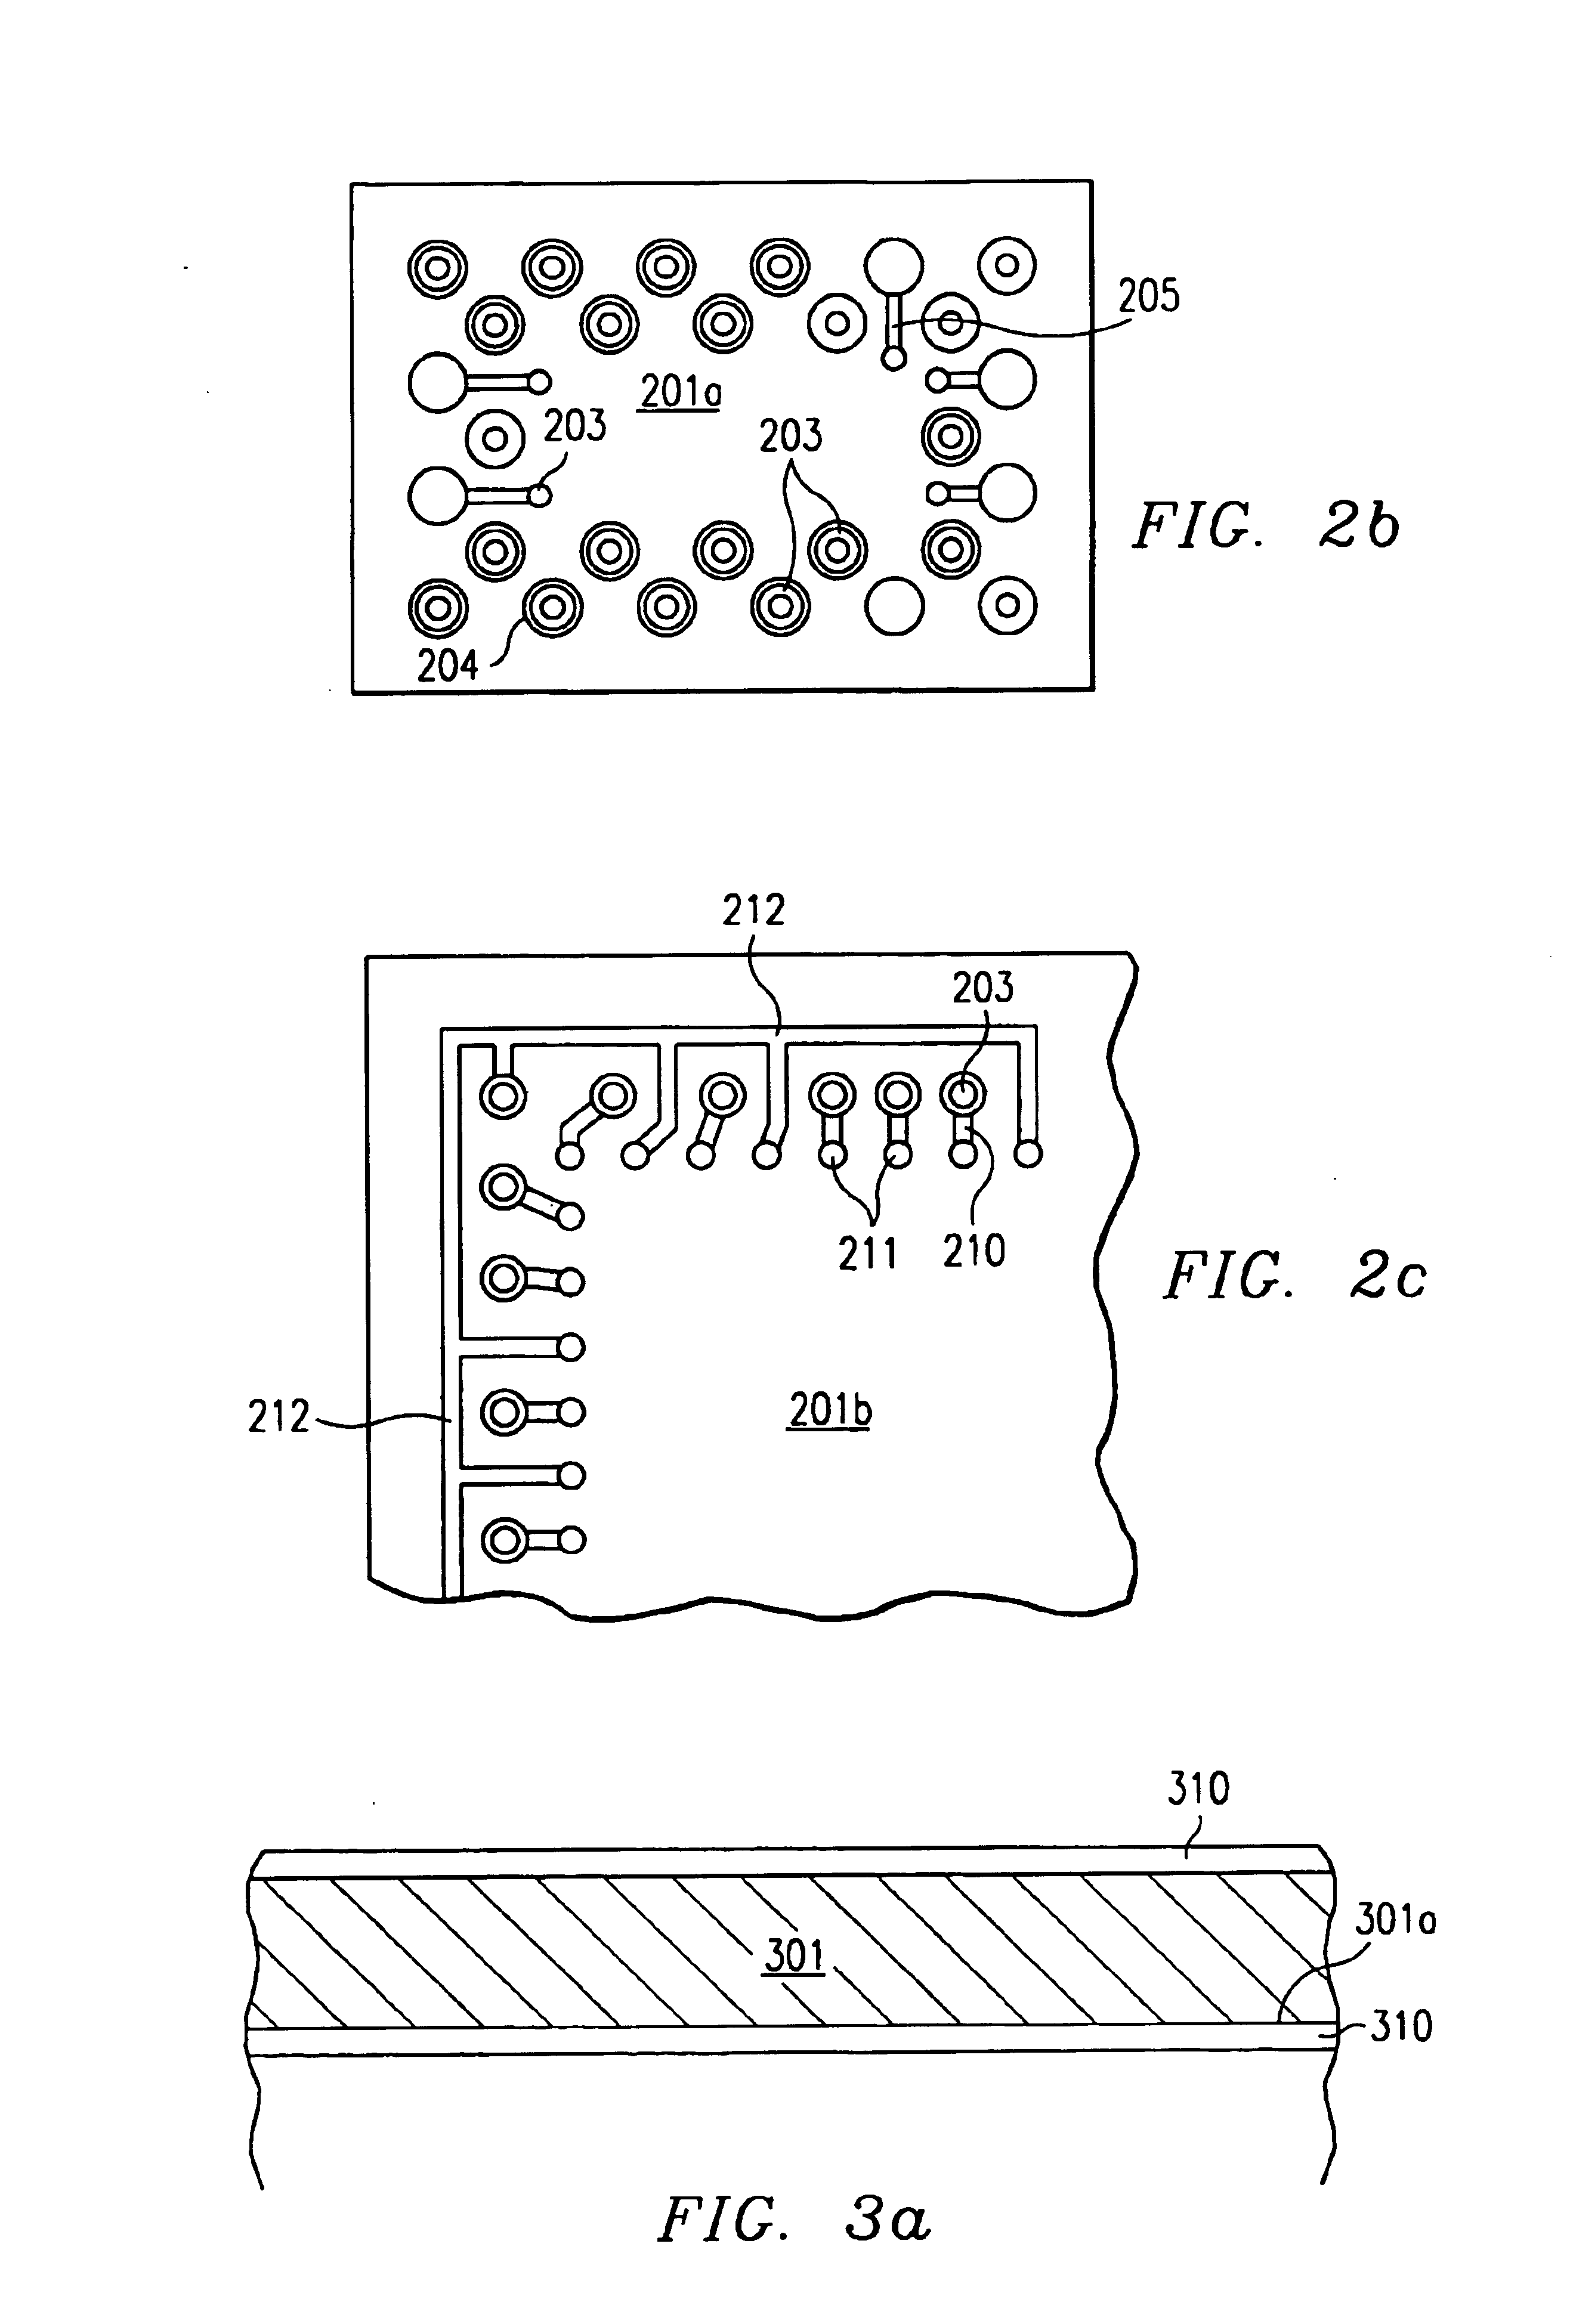 Method of fabricating flexible circuits for integrated circuit interconnections